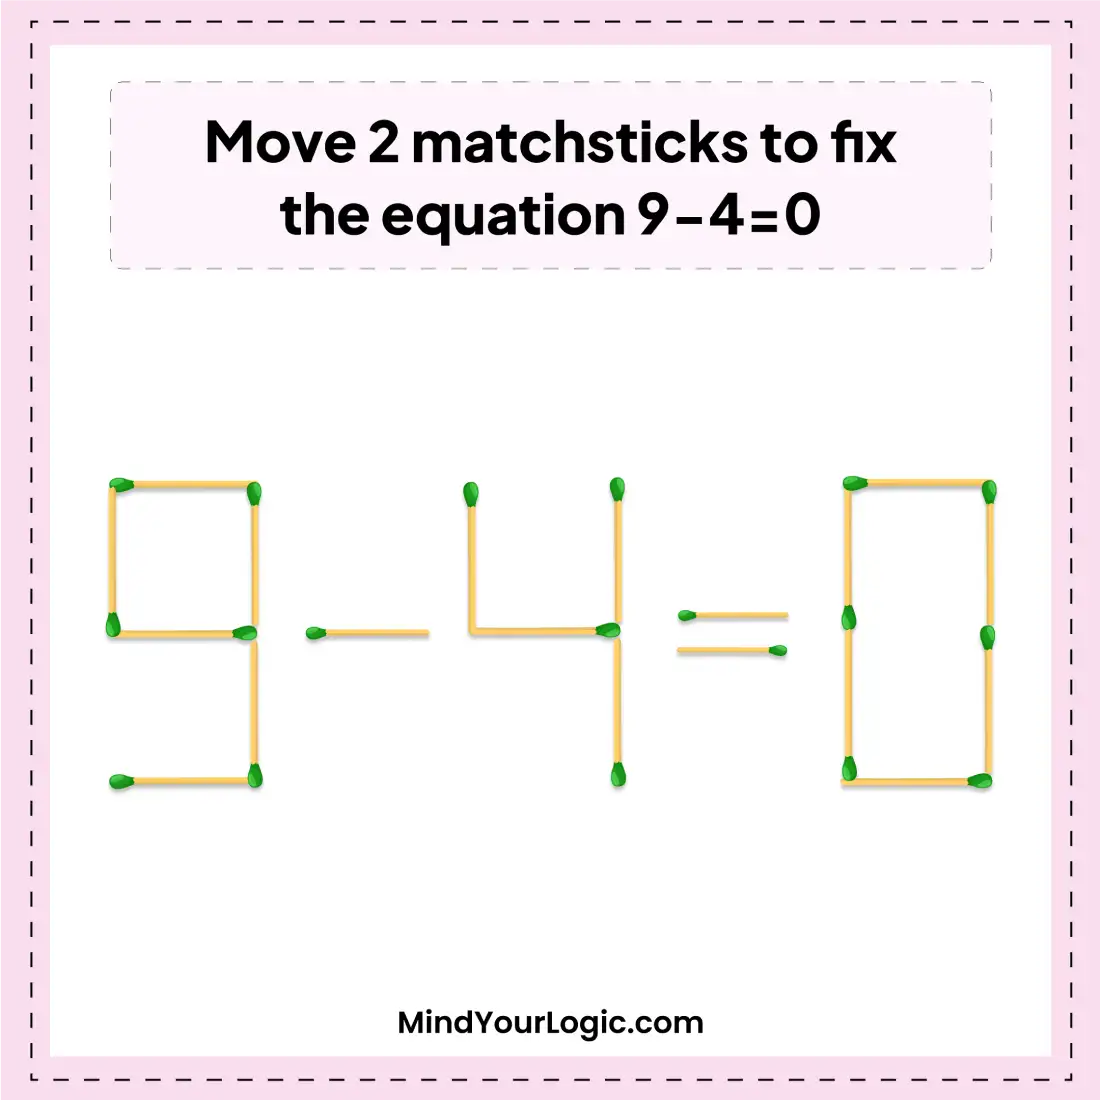 Correct The Equation With Just 2 Matchsticks Moves 9-4=0